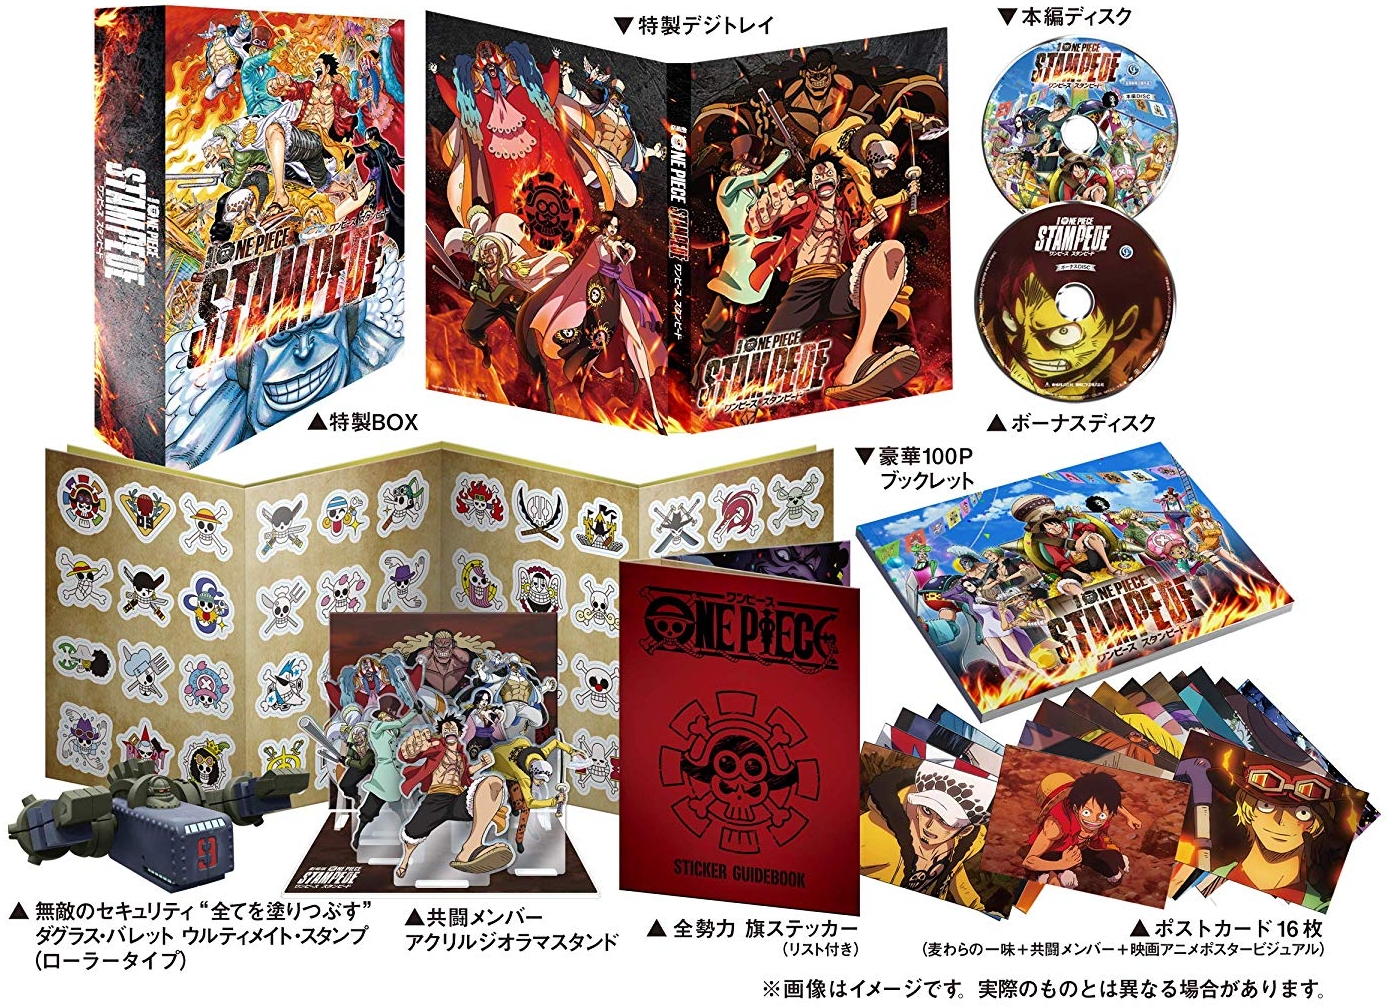 Wtk Jp Dvd One Piece Stampede March 18 T Co 0e680fqdob T Co Zpzissivfa T Co 0mbgzch9x5 Twitter